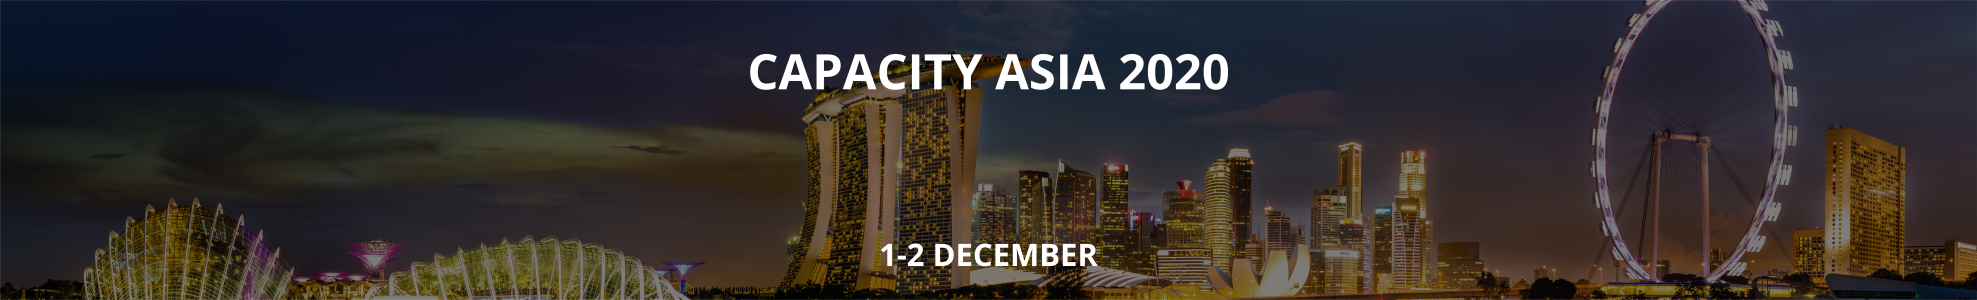 Meet the DIDWW team at the Capacity Asia 2020 virtual event